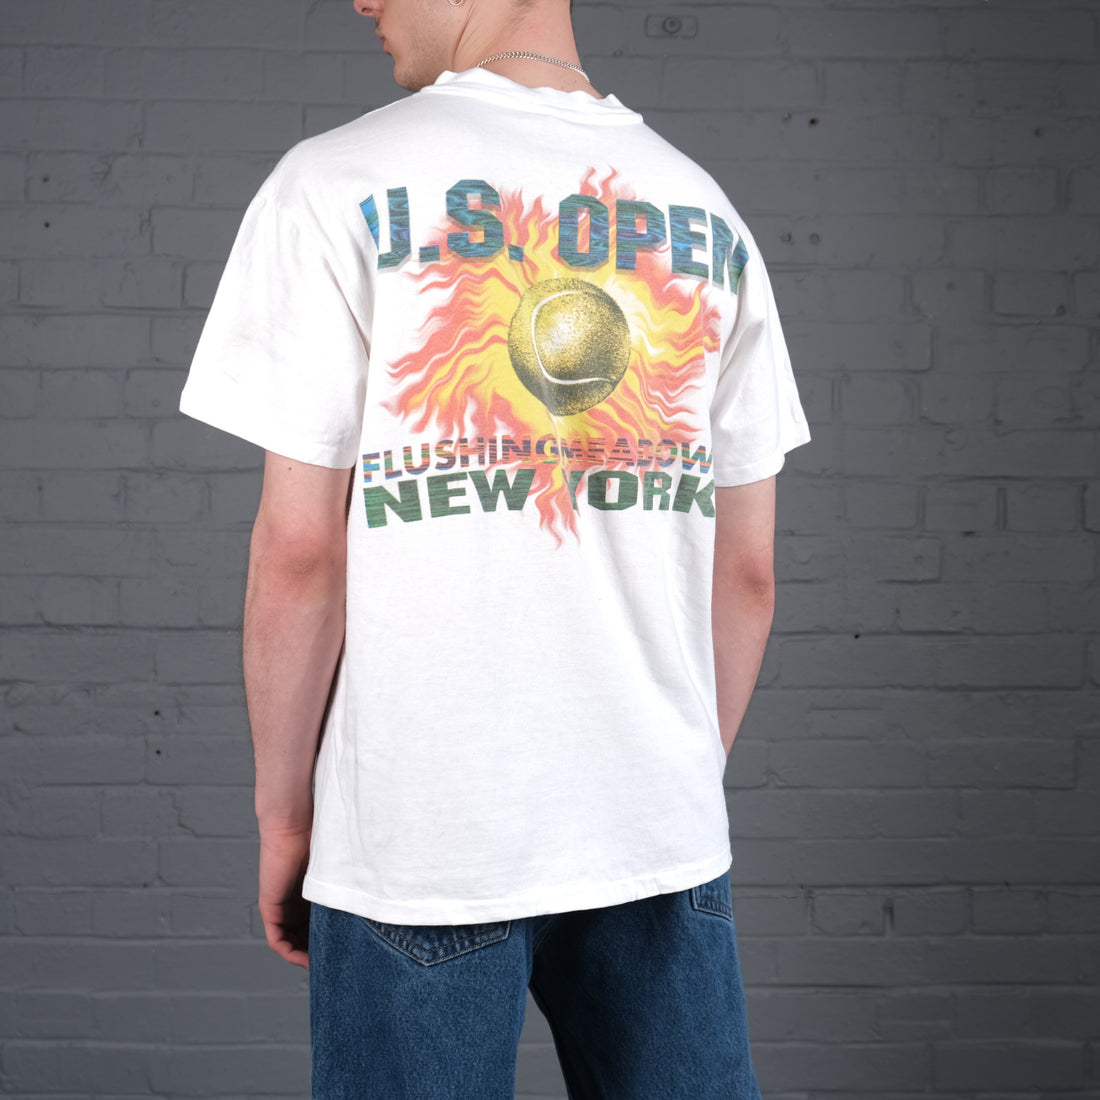 Vintage 1996 US Open graphic t-shirt in white